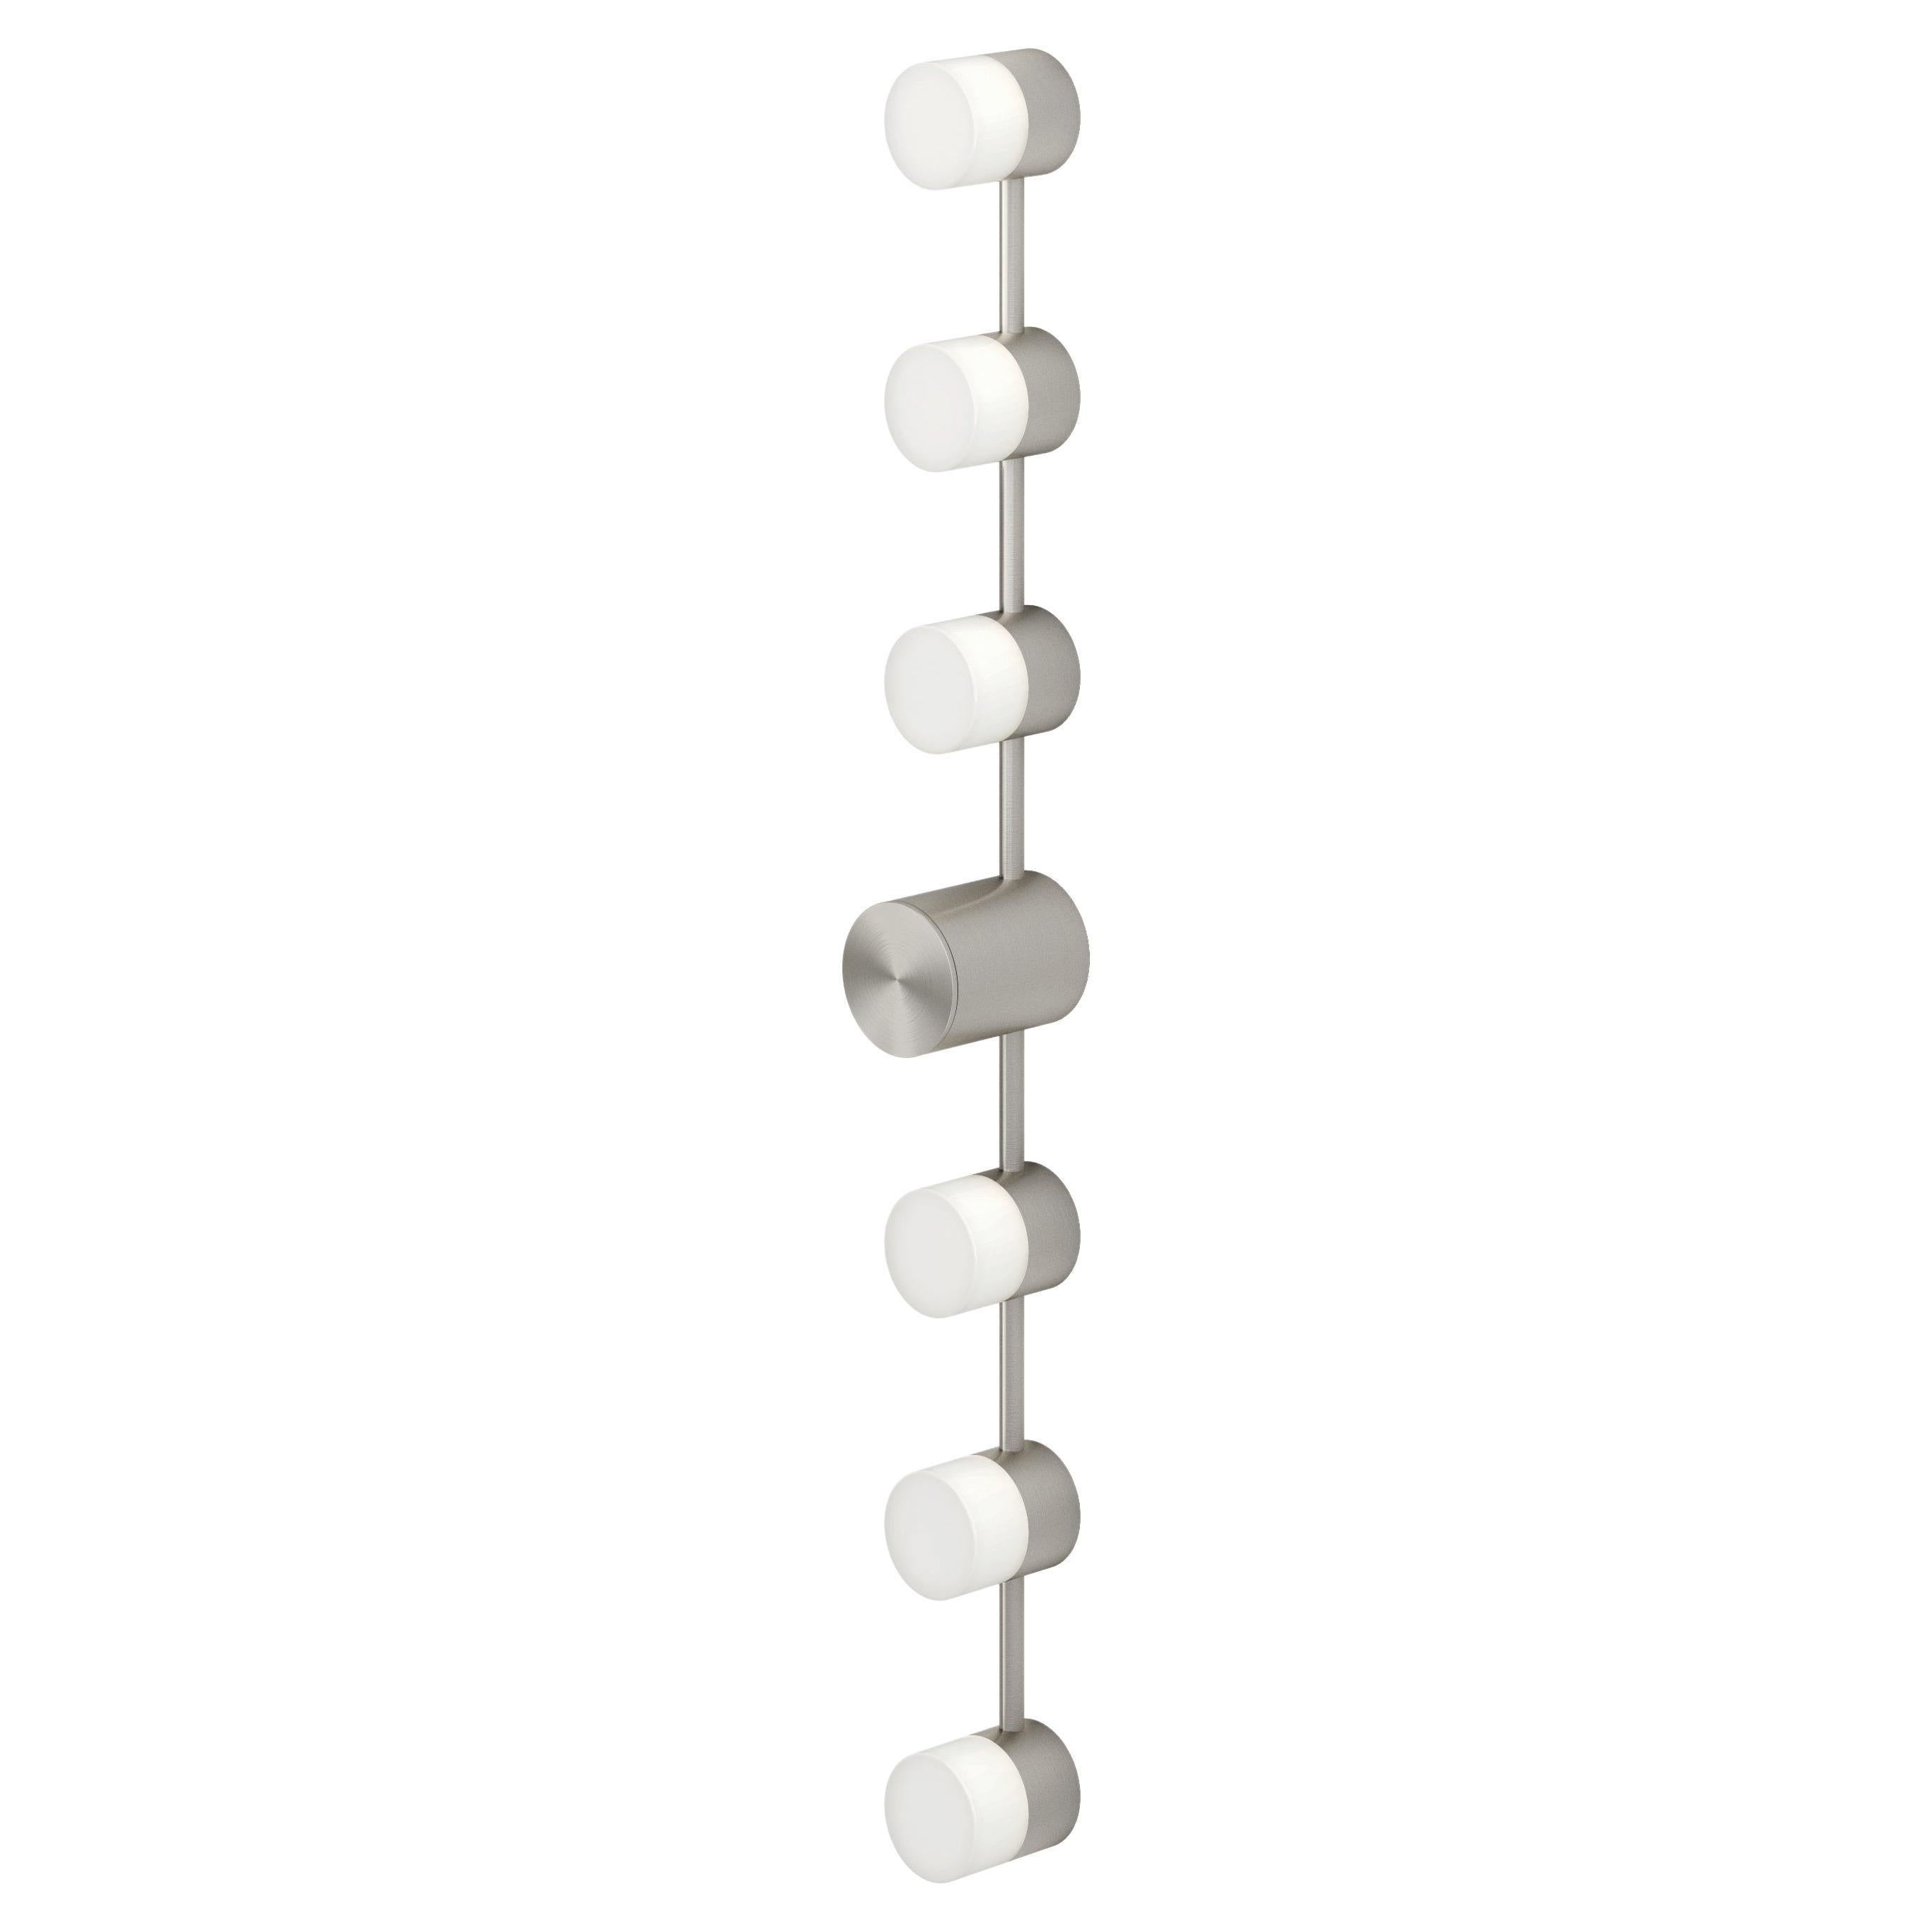 Ip Backstage L6 Satin Nickel Wall Light by Emilie Cathelineau